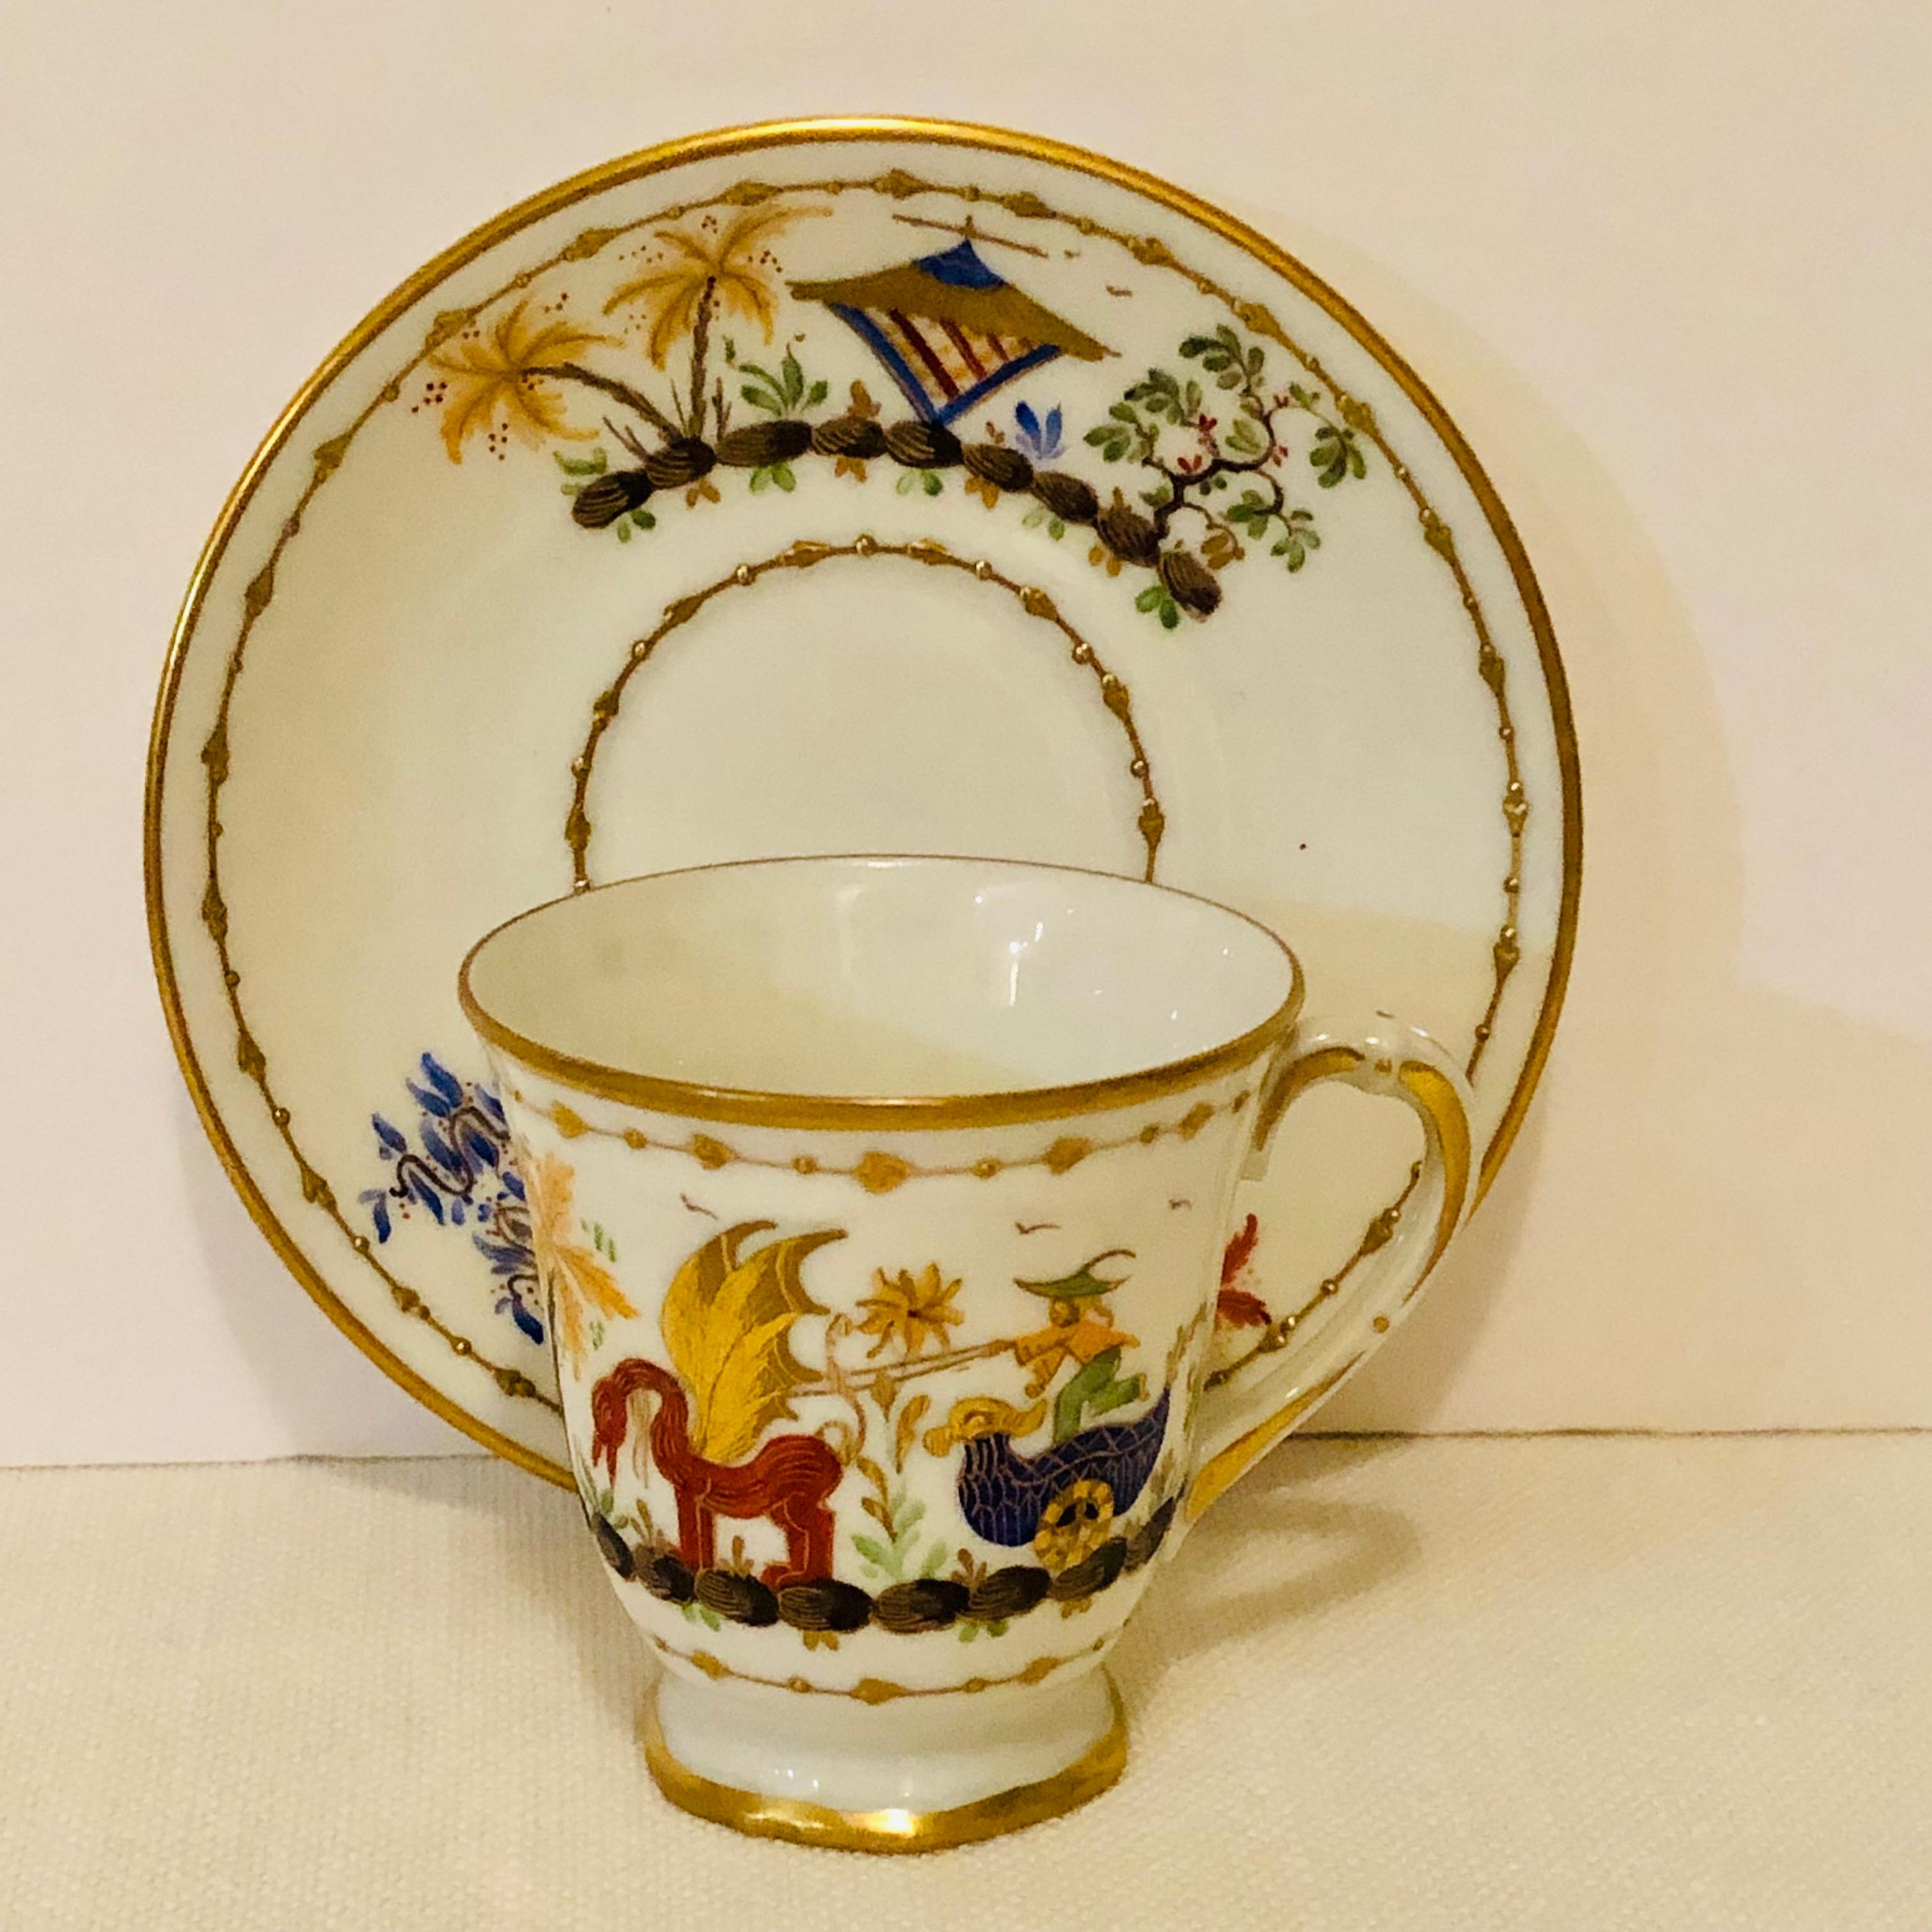 This is a wonderful Le Tallec demitasse cup and saucer in the Cirque Chinois pattern. This cup is hand painted with a whimsical chinoiserie scene which has raised gold accents on a white ground. This cup and saucer was decorated by the Le Tallec